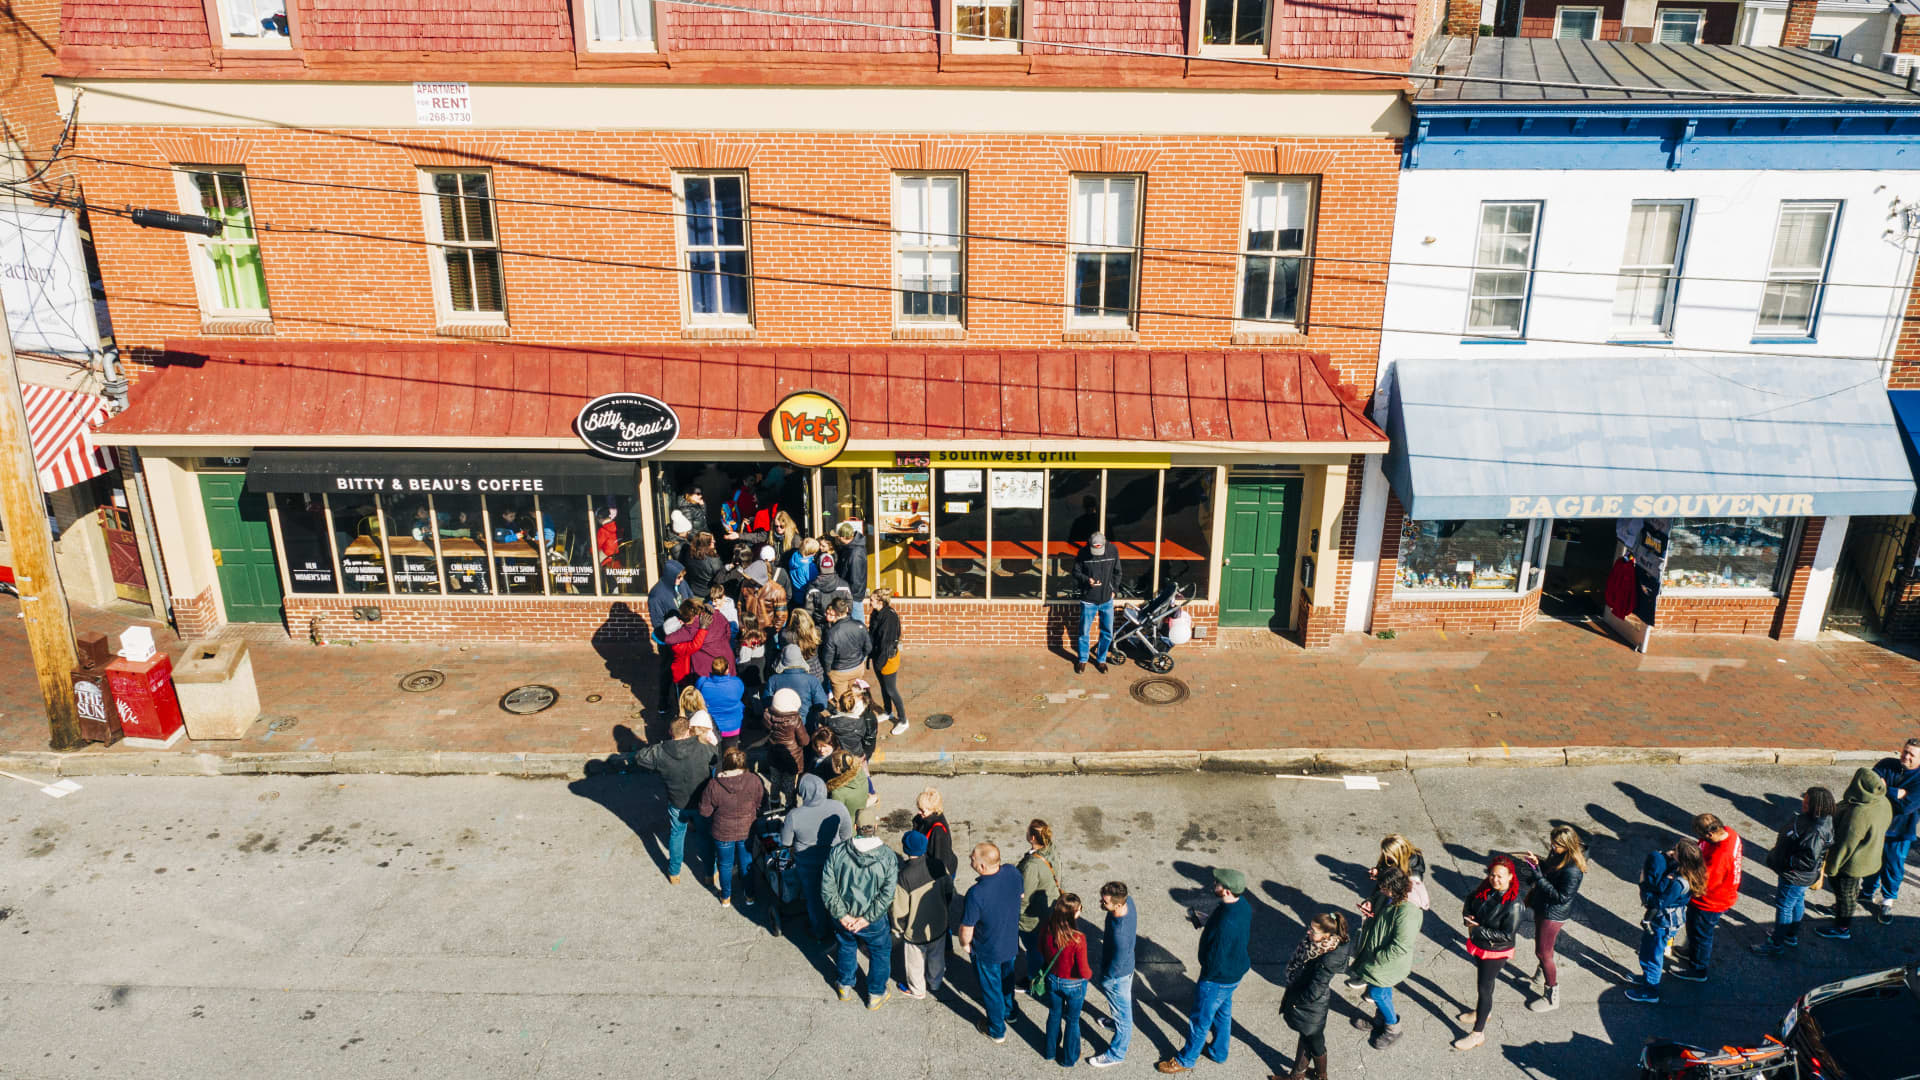 Customers in a long line outside a location of Bitty and Beau's Coffee in Annapolis, Maryland.